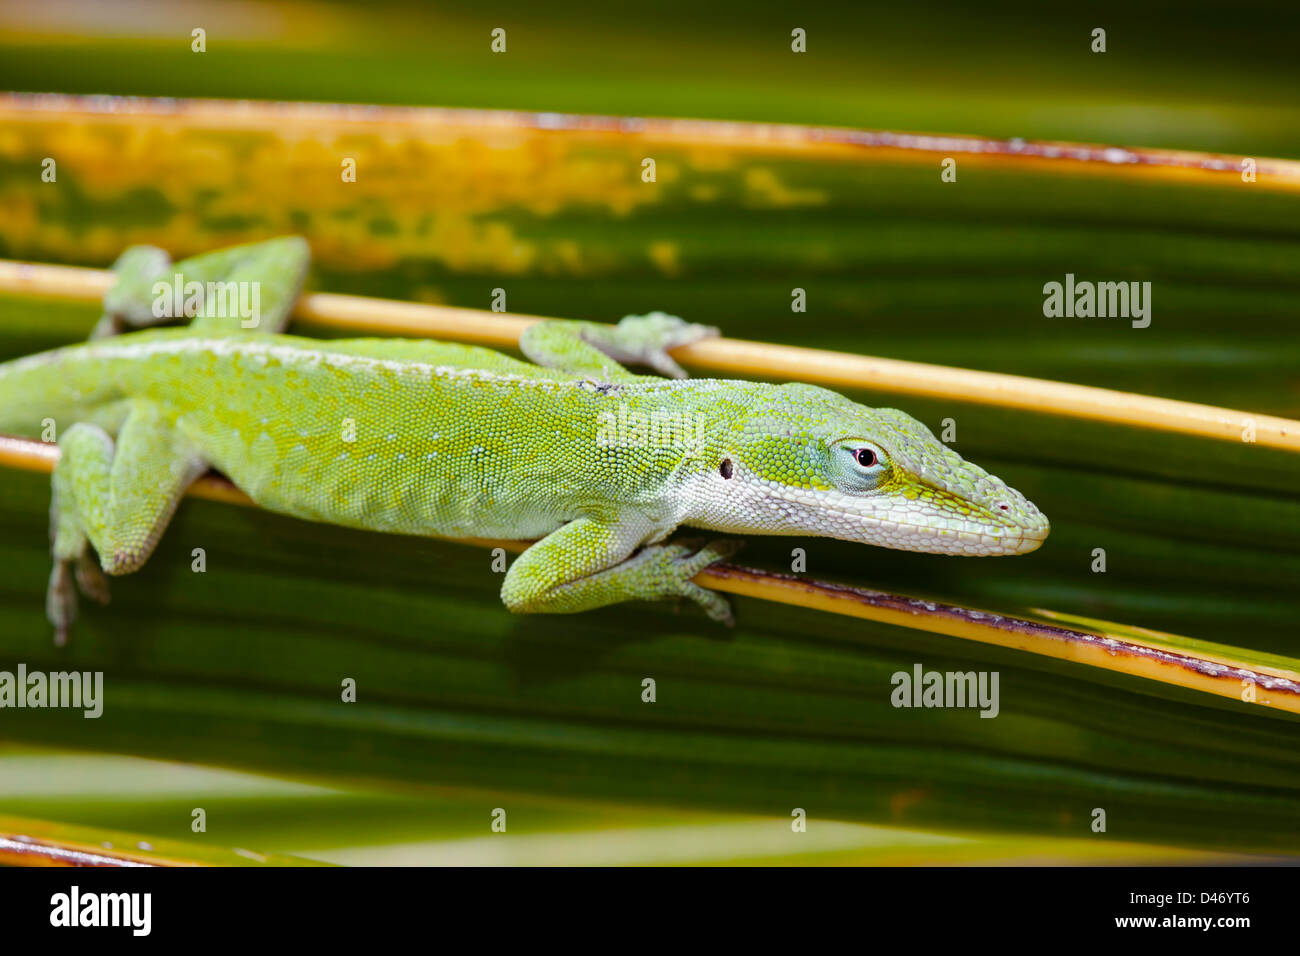 The green anole lizard, Anolis carolinensis porcatus, is a native of Cuba and was released on Oahu in 1950, Hawaii. Stock Photo